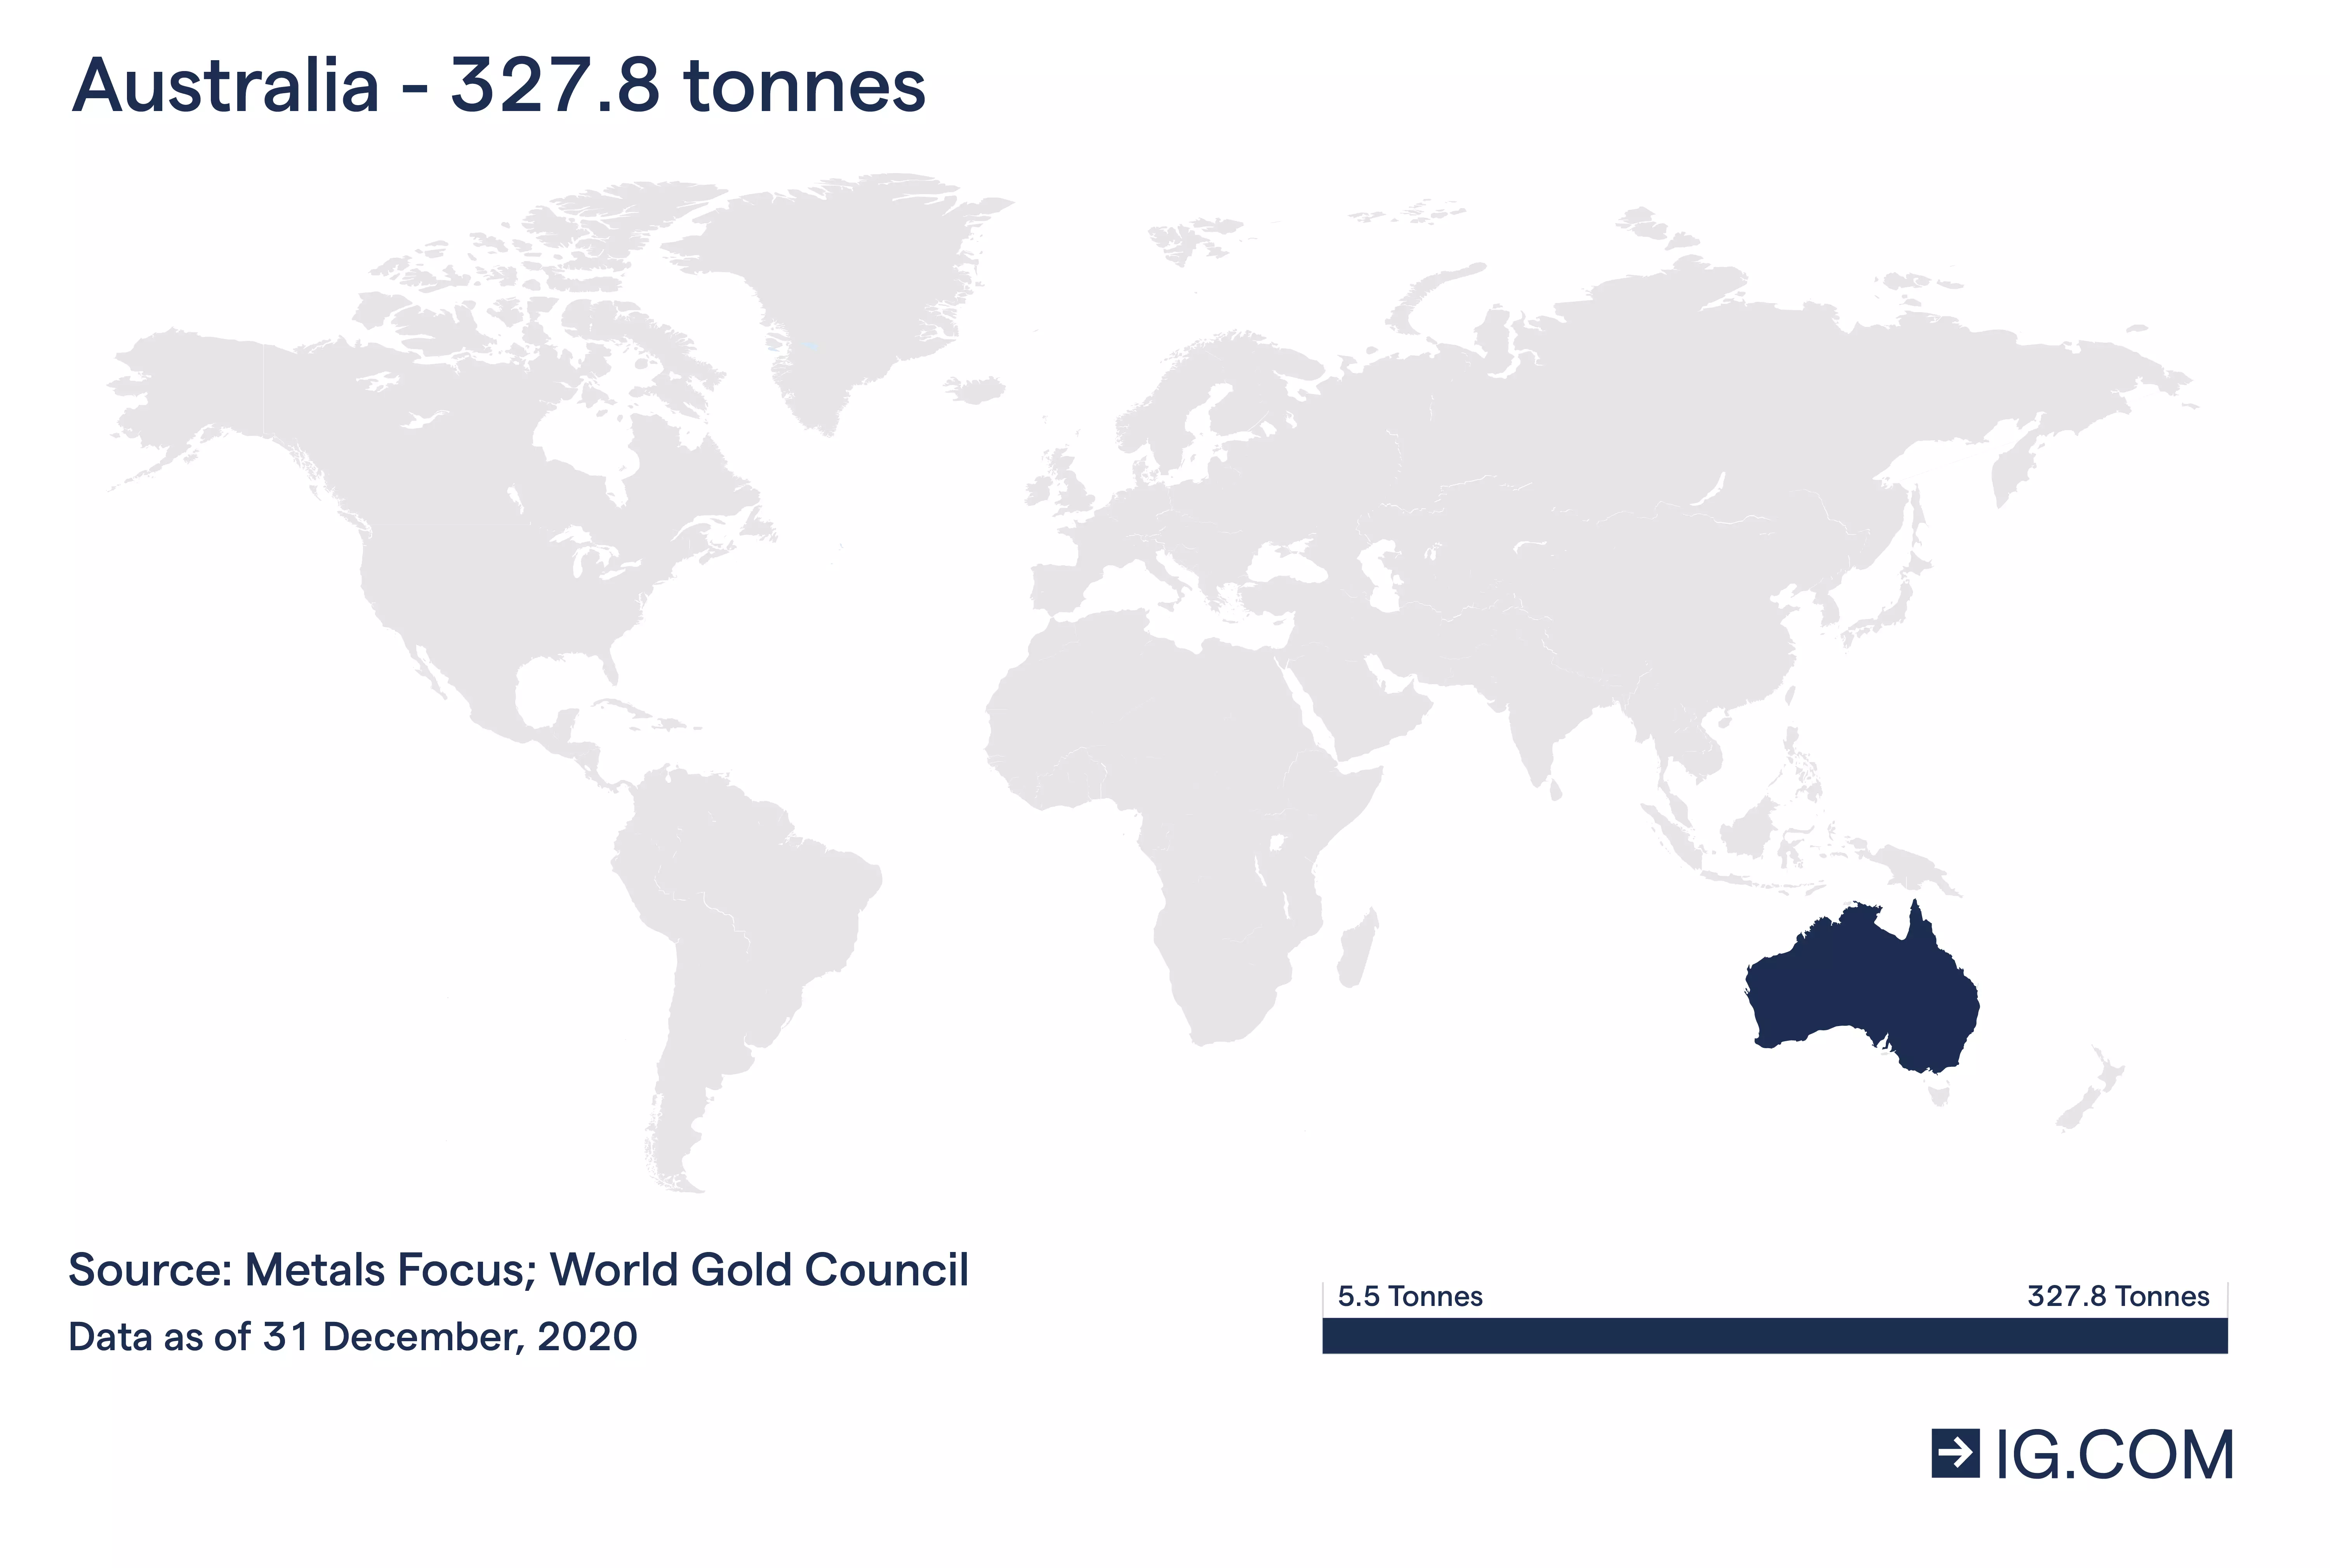 World map showing the contour of Australia as the world’s third largest gold producer